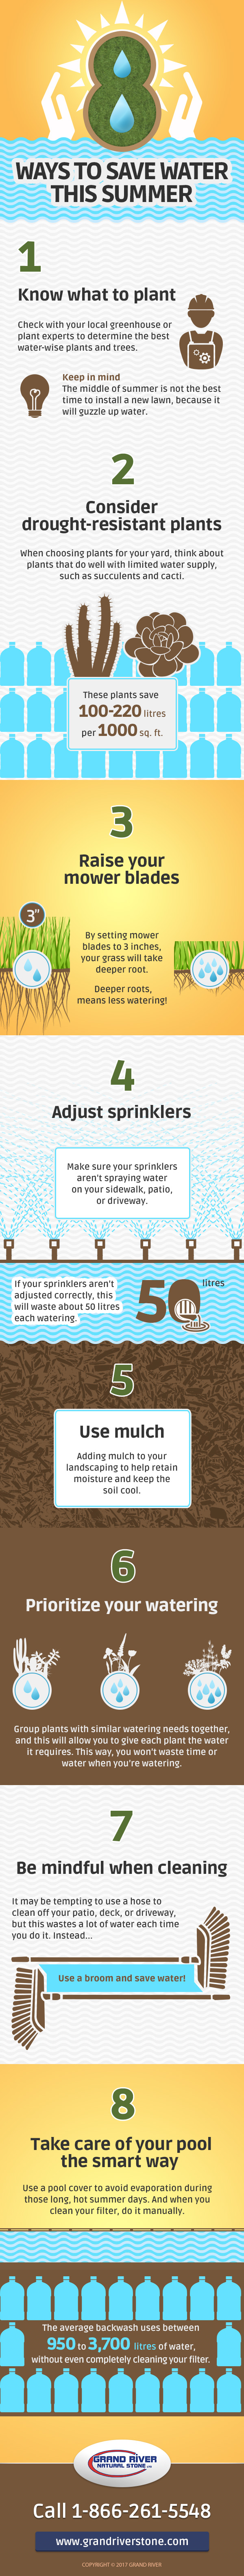 8 Ways to Conserve Water at Home for Summer: an infographic with helpful tips to reduce water waste when landscaping.